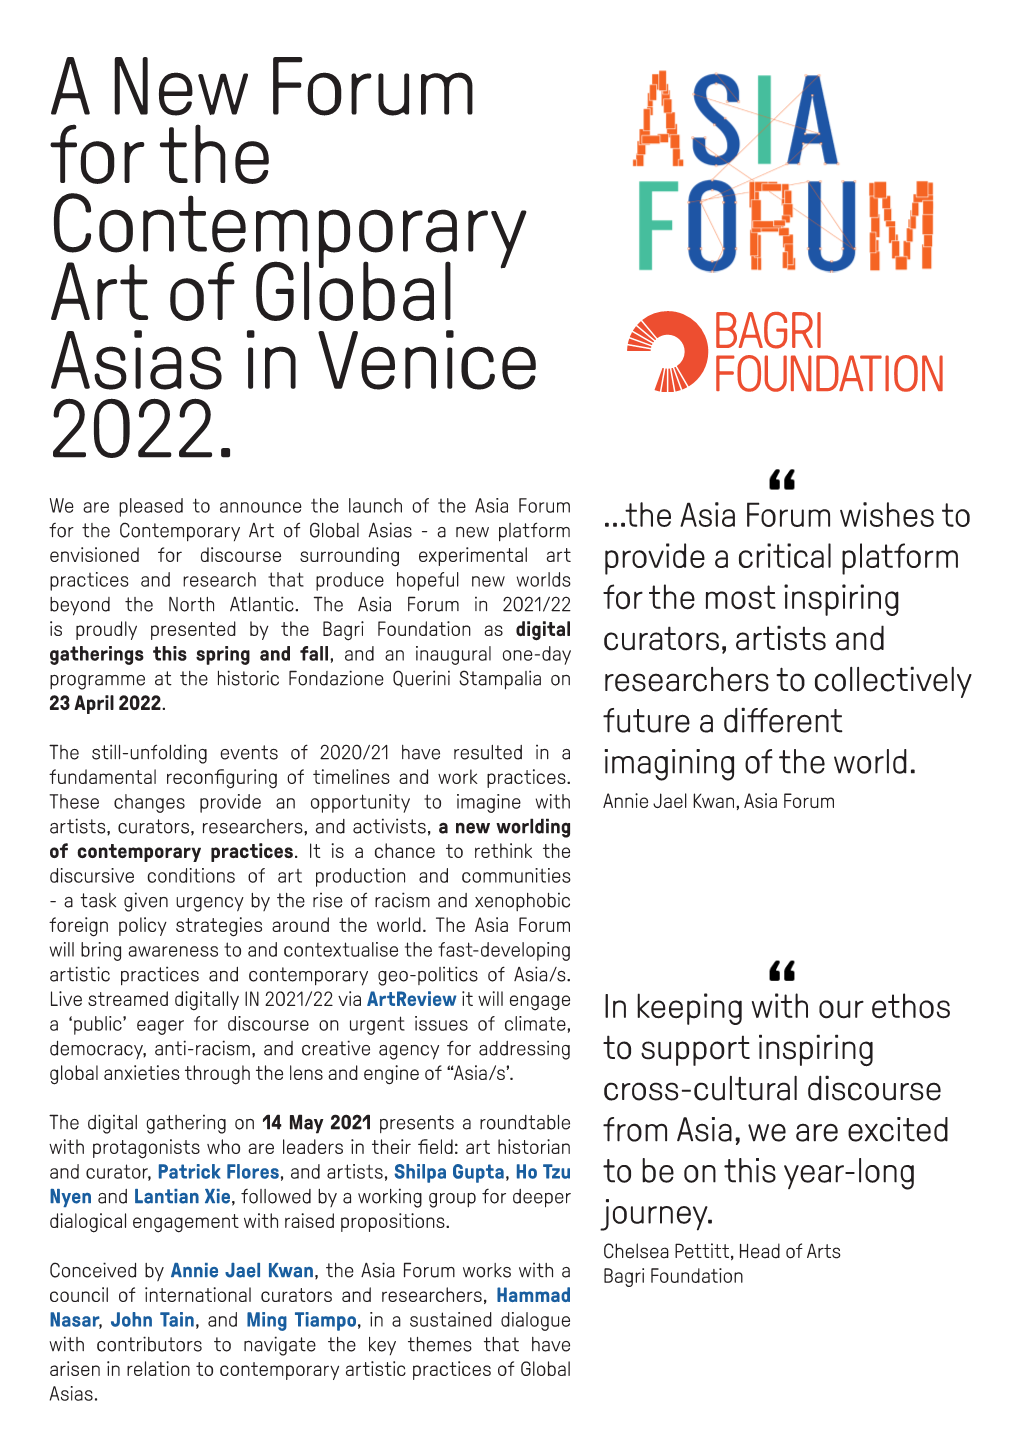 A New Forum for the Contemporary Art of Global Asias in Venice 2022